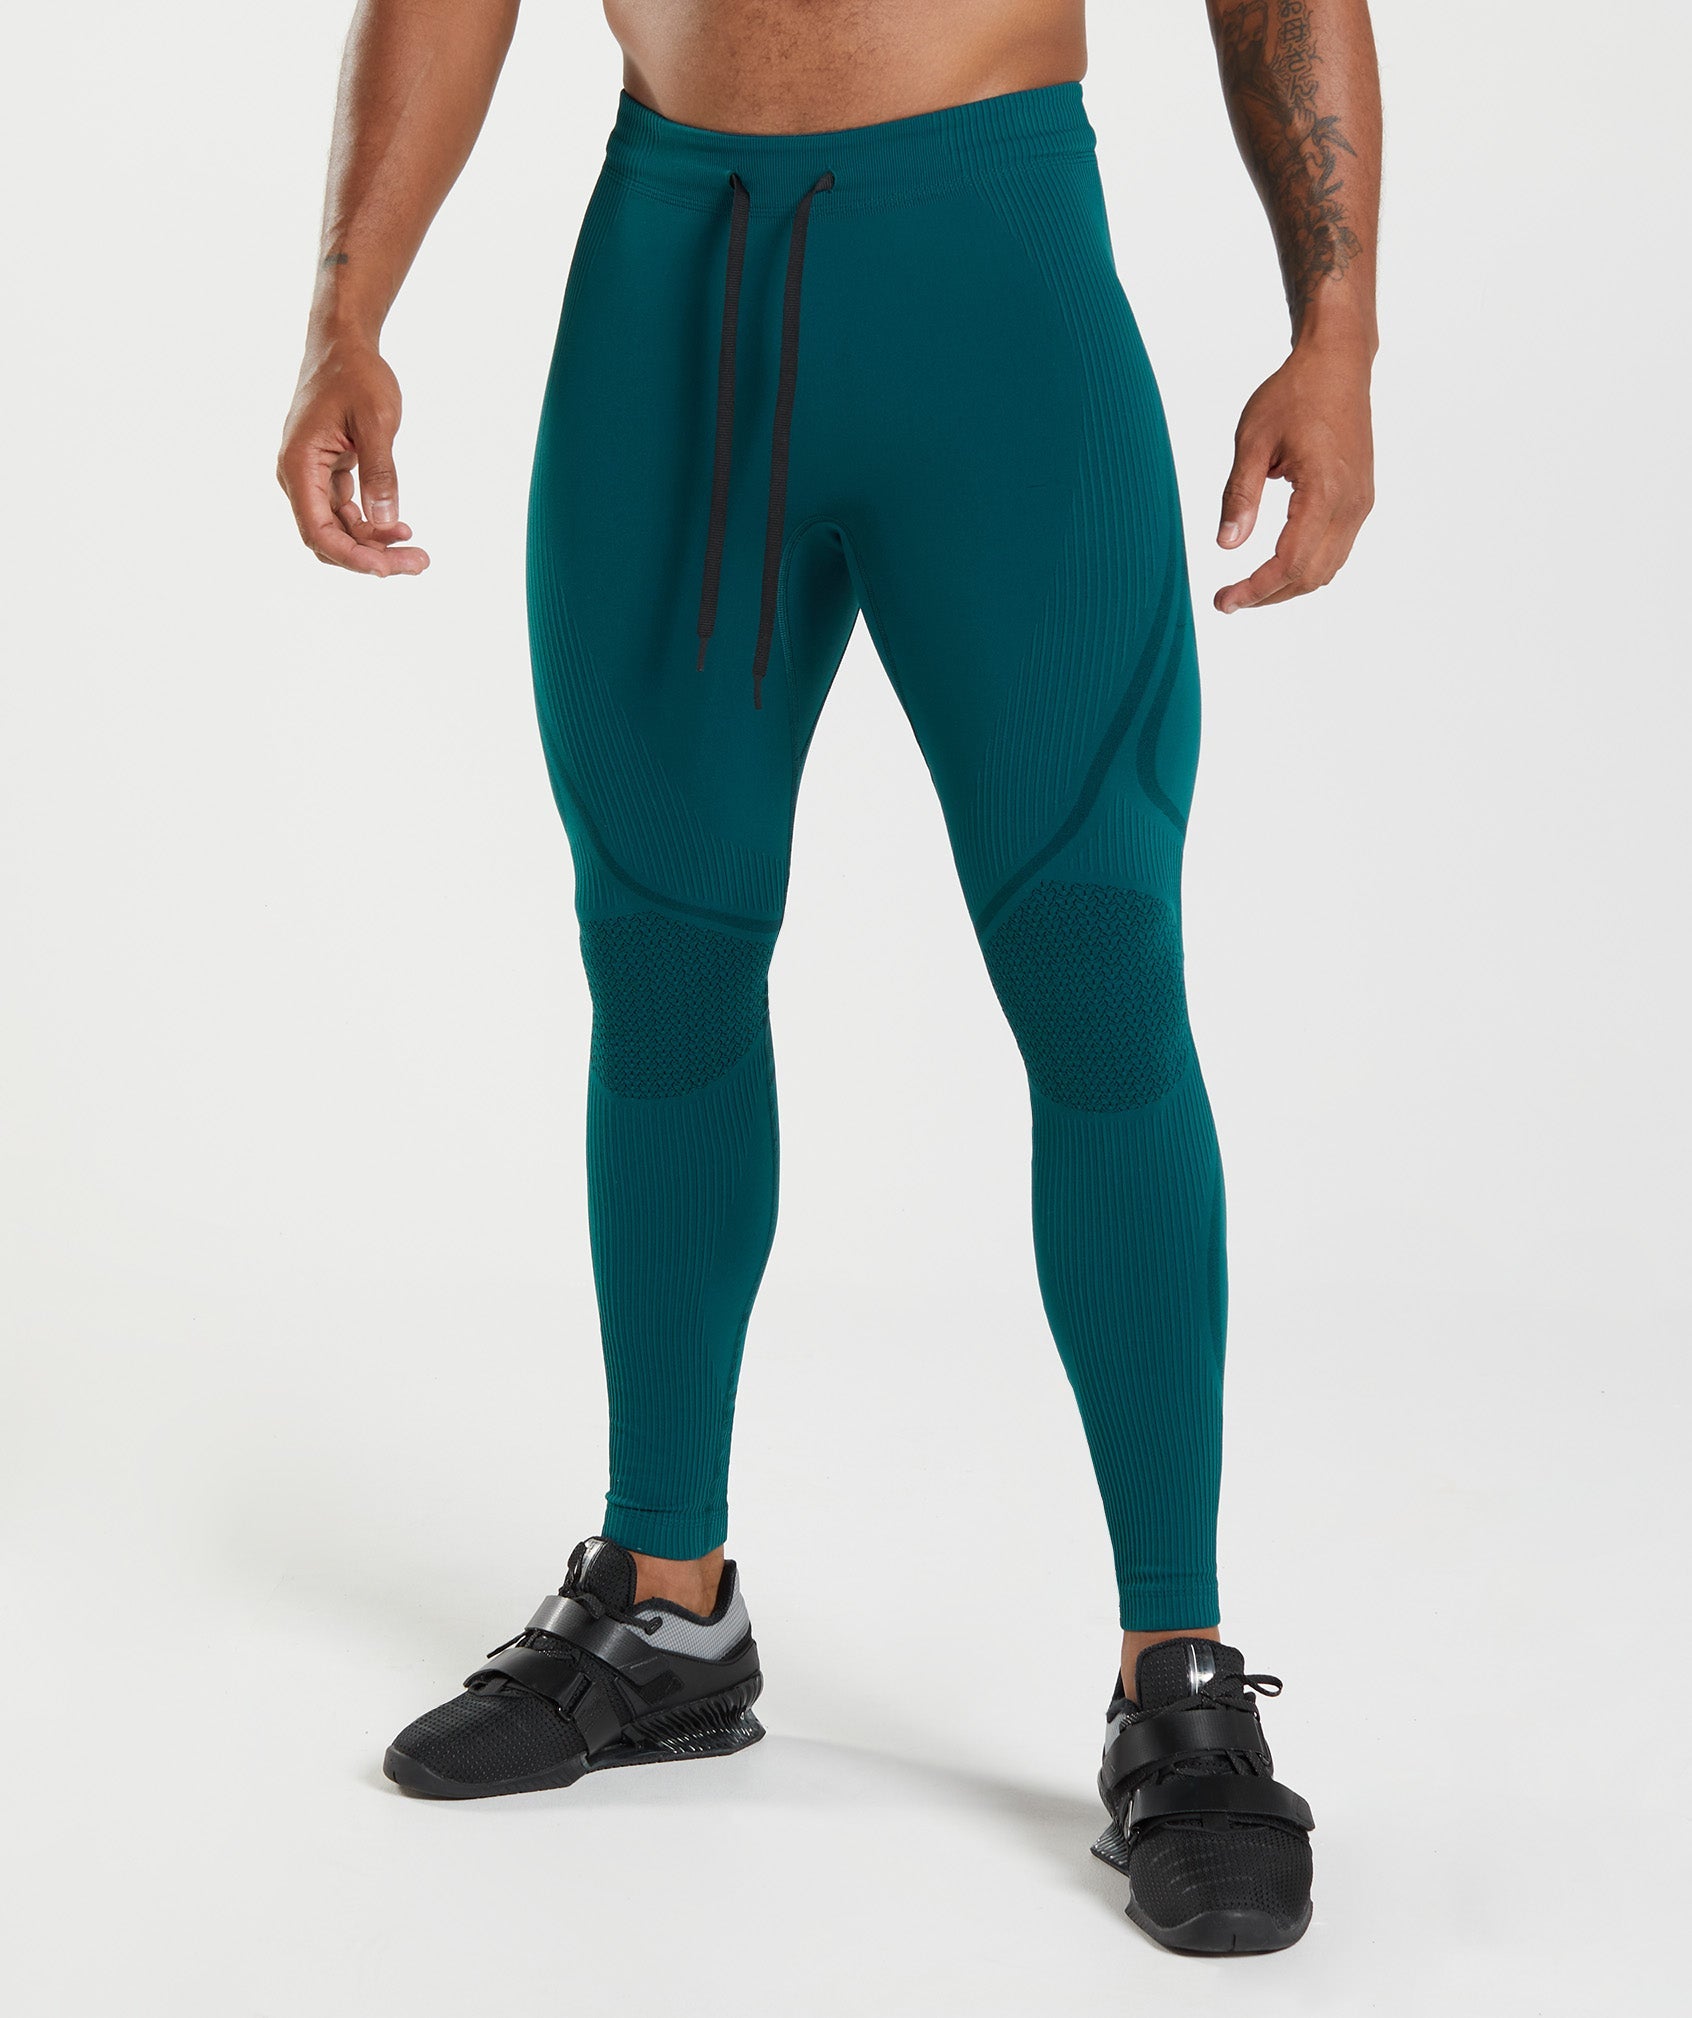 315 Seamless Tights in Winter Teal/Black - view 1